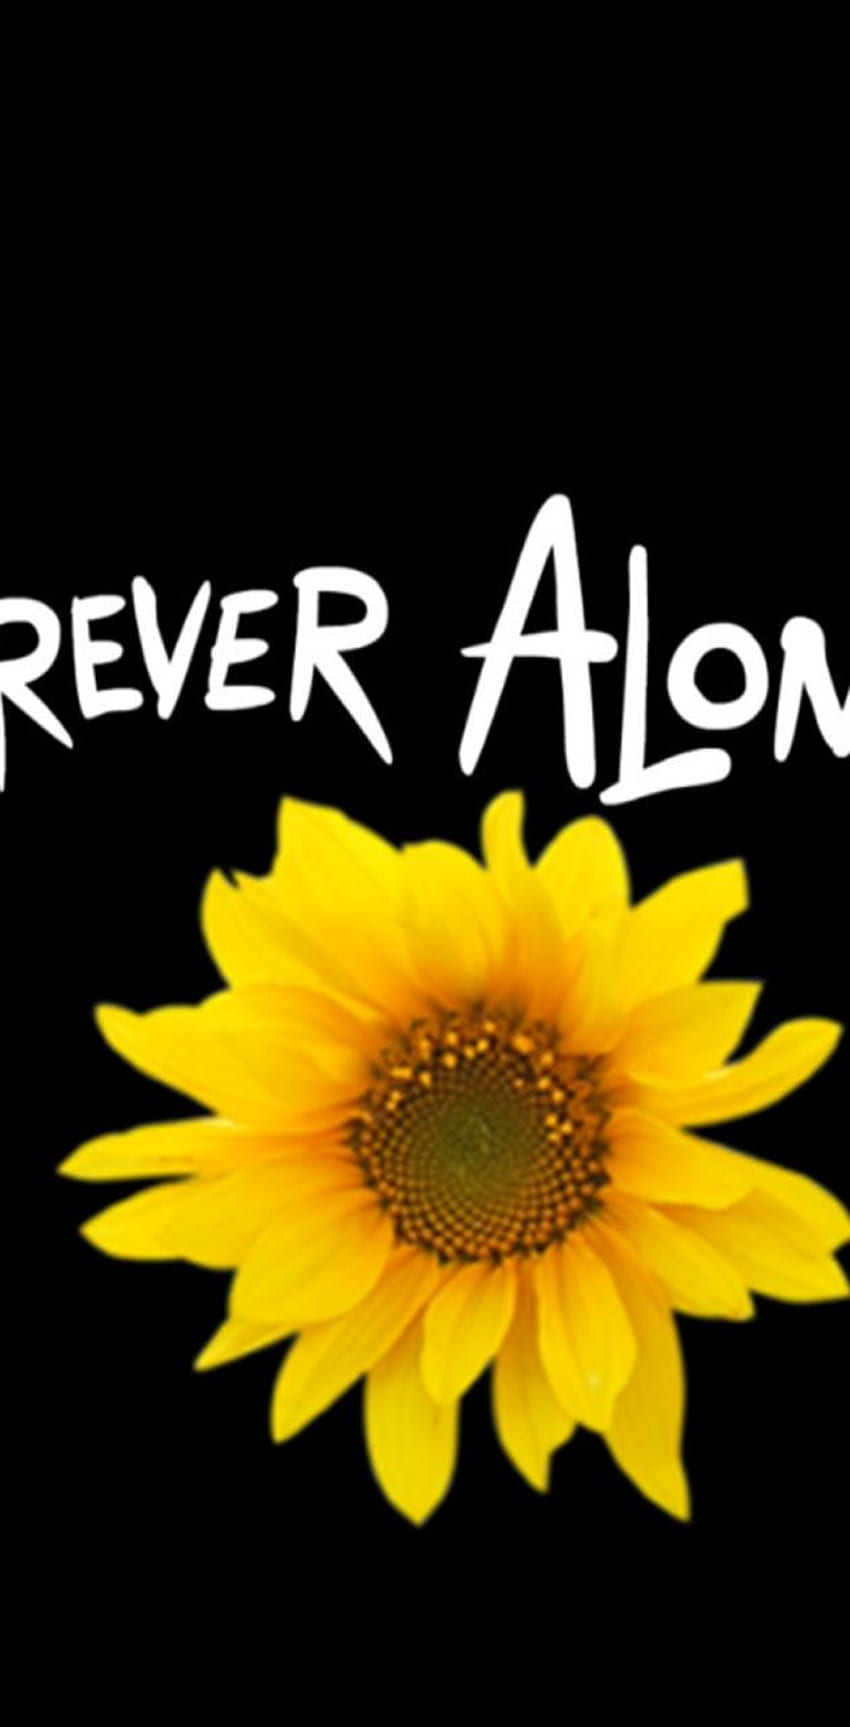 Forever Alone by PerfumeVanilla - on ZEDGEâ, Lonely Sunflower HD phone wallpaper